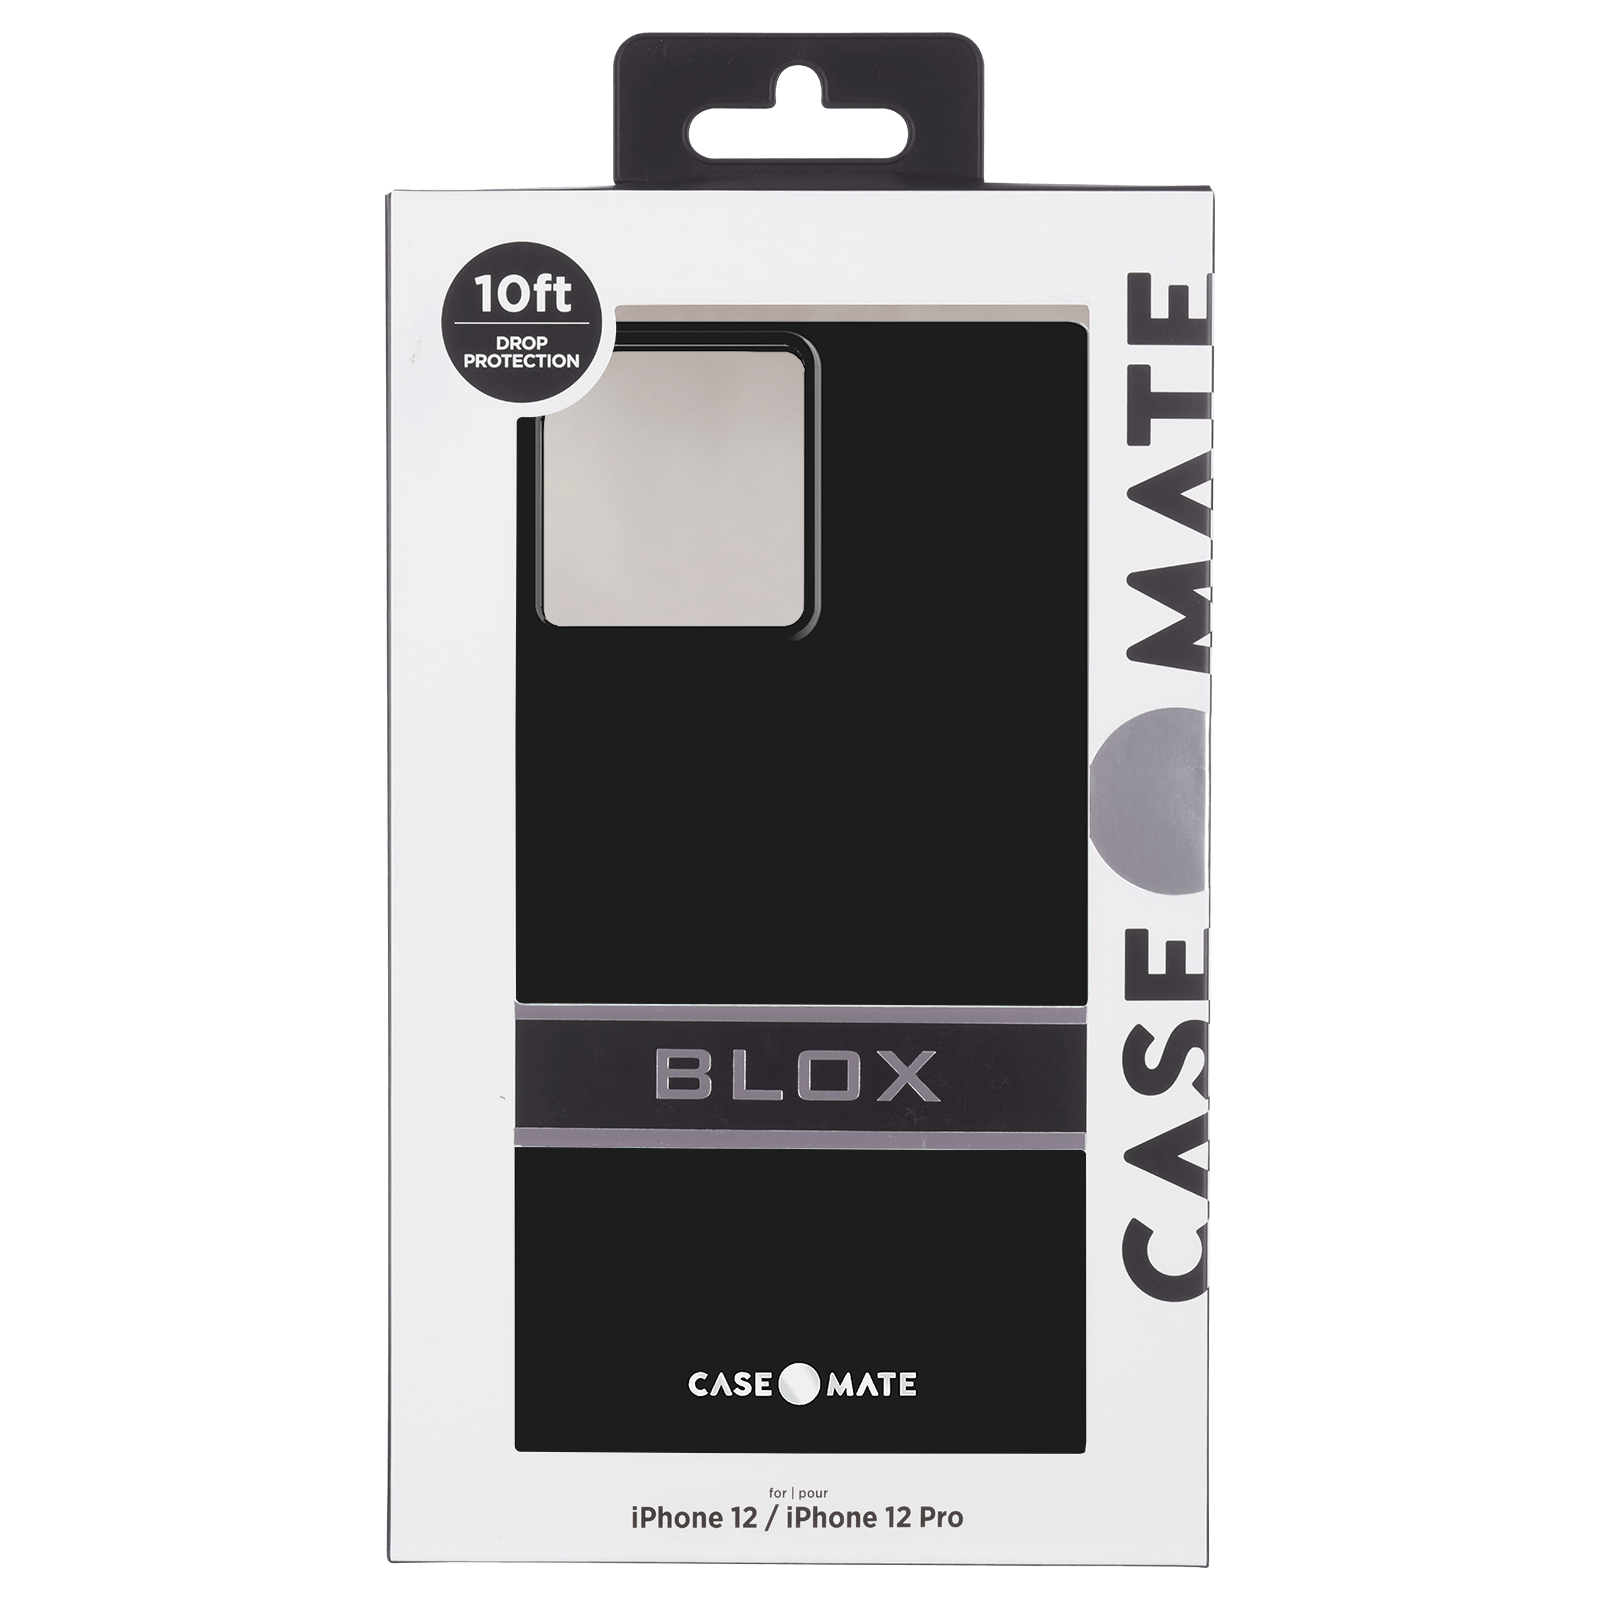 BLOX packaging. 10 ft Drop Protection. Case-Mate BLOX for iPhone 12 / iPhone 12 Pro. color::Black